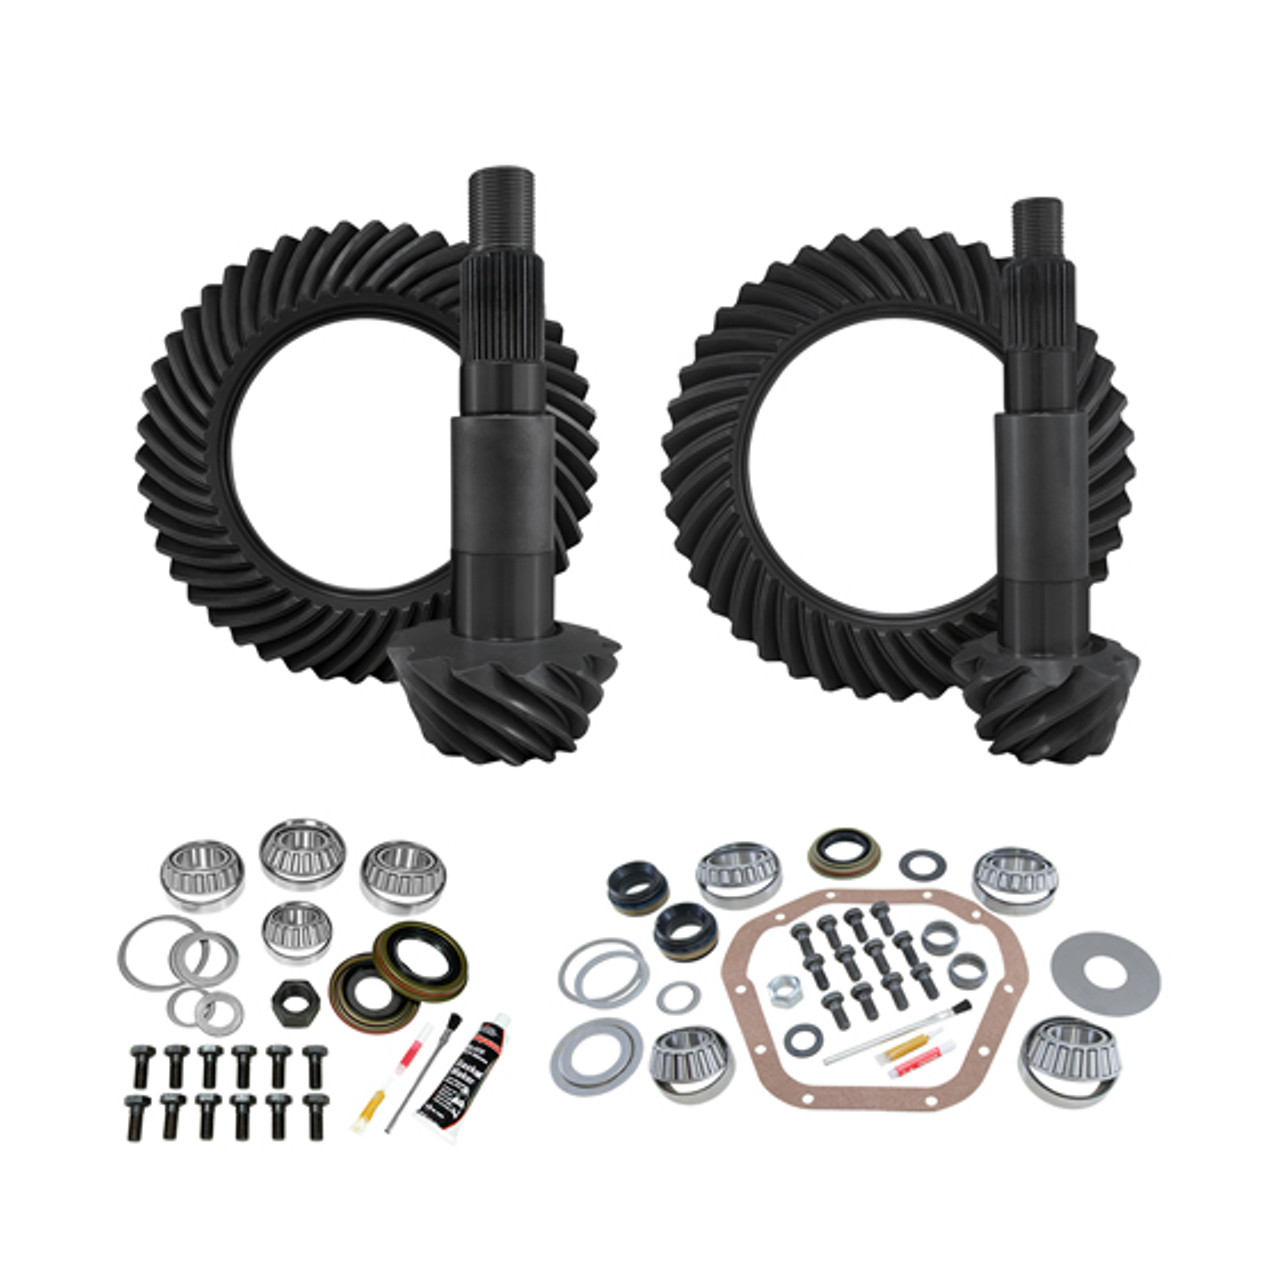 Yukon Complete Gear and Kit Package for F350 Dana 80 Rear & Dana 60 Front, with 4:11 Gear Ratio